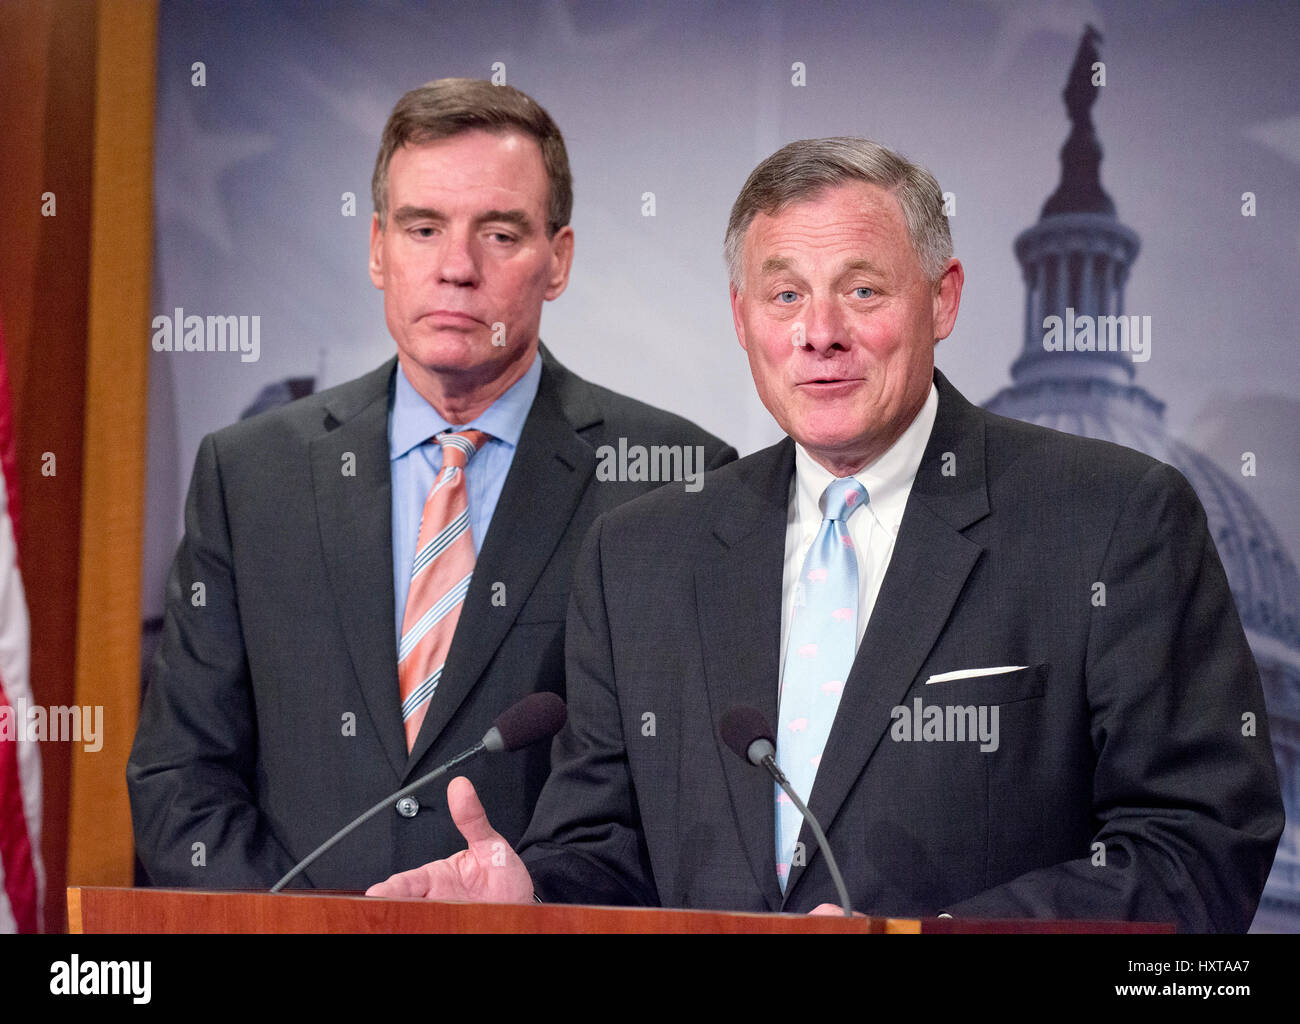 United States Senator Richard Burr (Republican of North Carolina), Chairman, US Senate Select Committee on Intelligence, right, and US Senator Mark Warner (Democrat of Virginia), Vice Chairman, US Senate Select Committee on Intelligence, left, hold a joint press conference in the US Capitol to discuss the upcoming committee hearings on Russian intelligence activities in the US and around the world on Wednesday, March 29, 2017. Credit: Ron Sachs/CNP - NO WIRE SERVICE - Photo: Ron Sachs/Consolidated/dpa Stock Photo